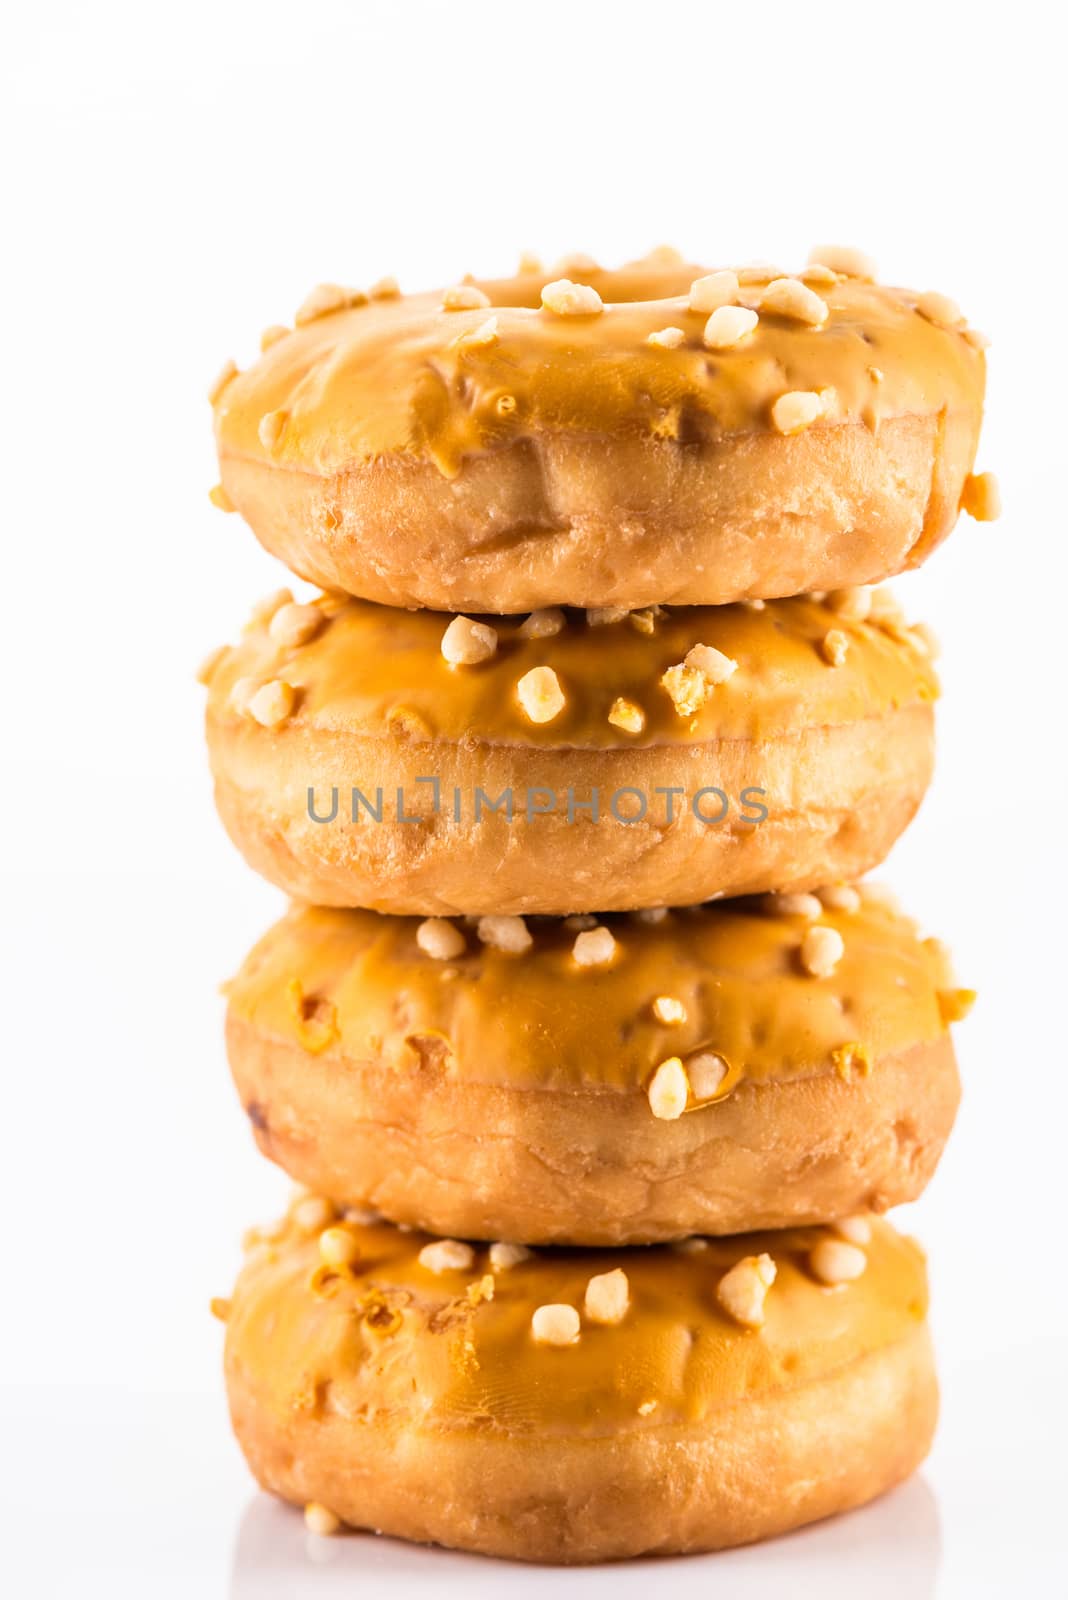 Salted Caramel Donut or Dougnut Tower on White Background by merc67